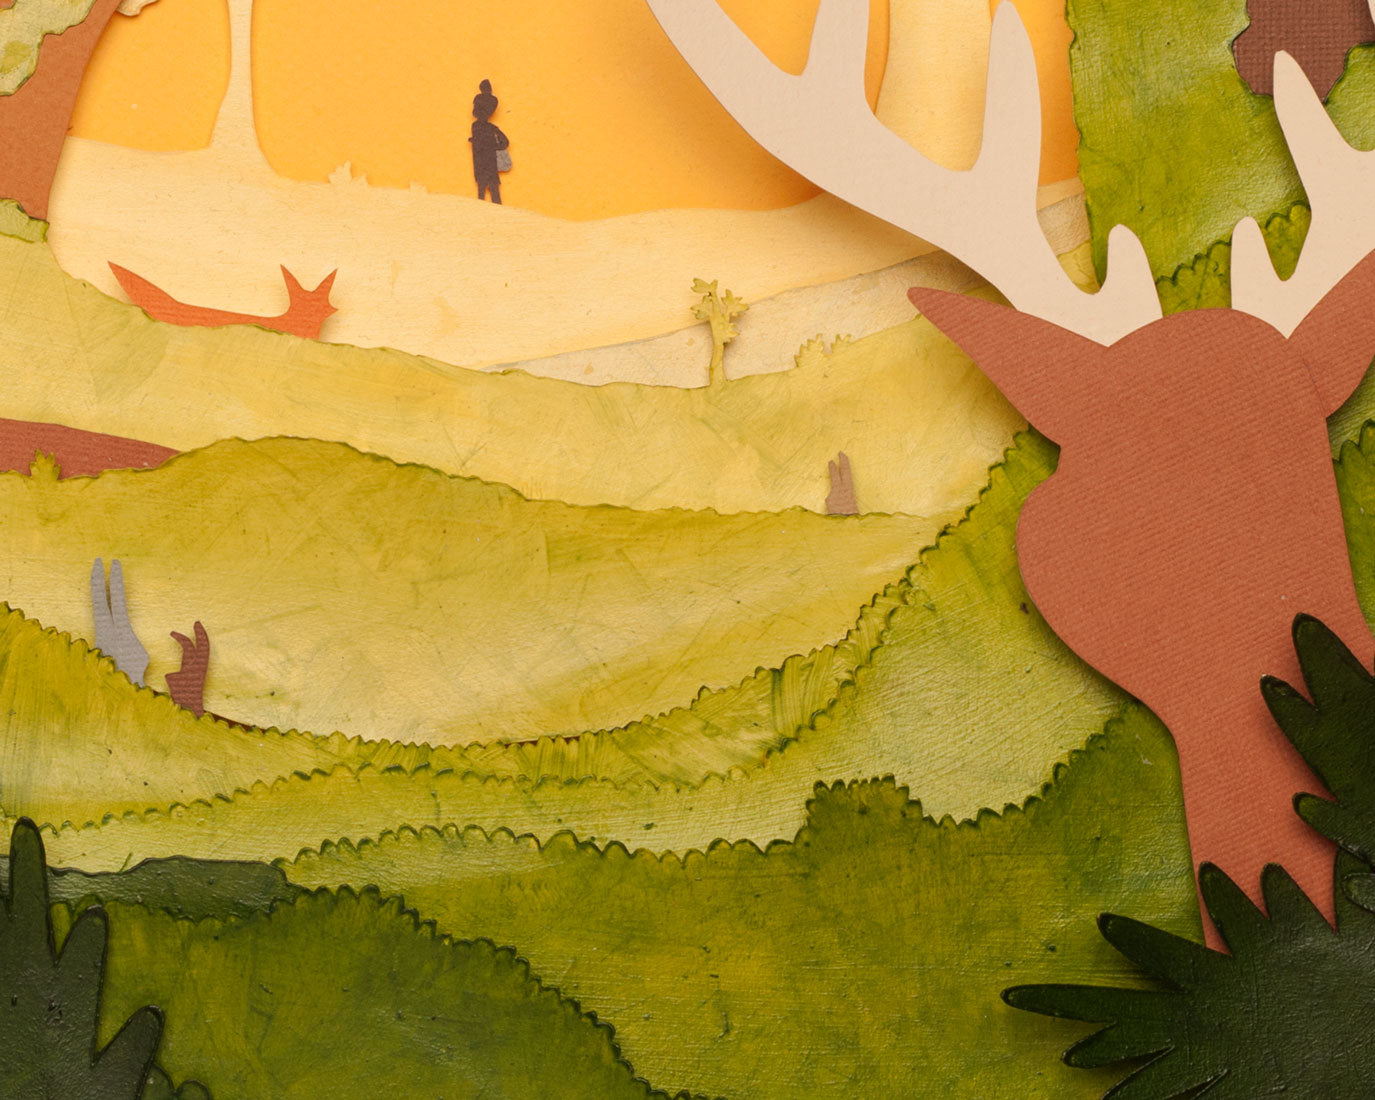 Archival print of cut paper illustration of cute whimsical forest scene with deer, fox, and bunnies.